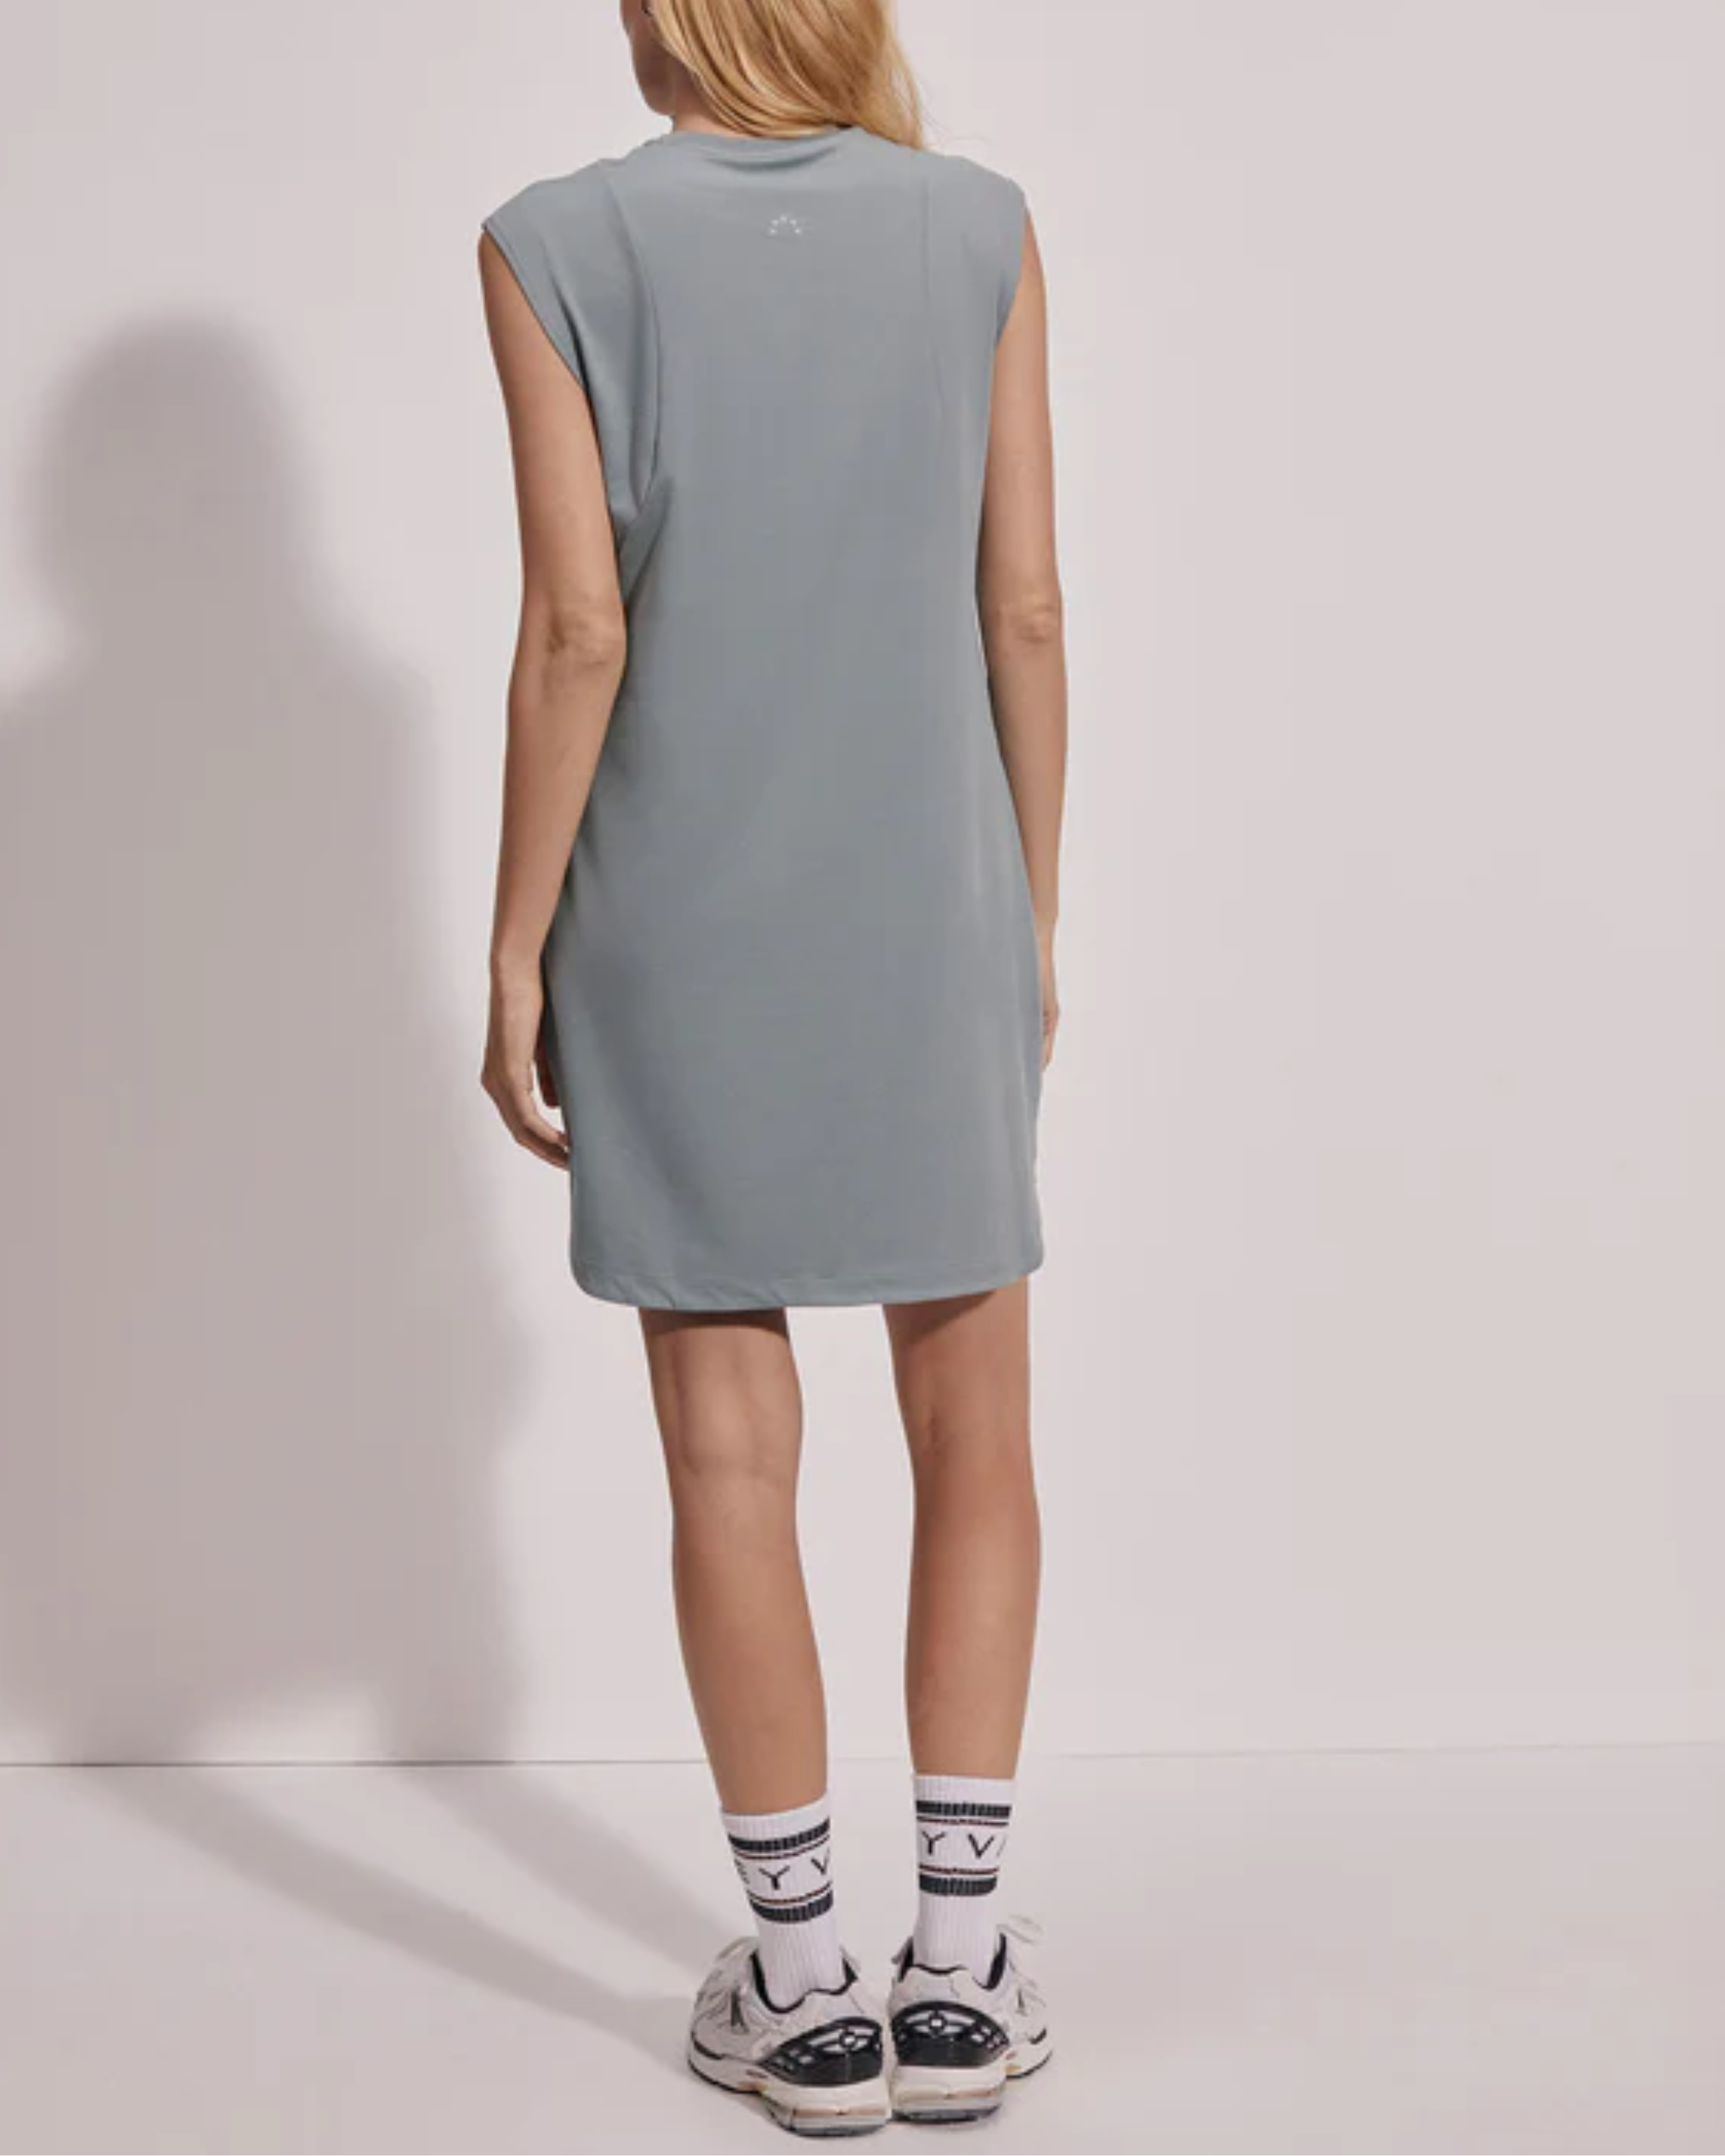 Varley Naples Dress in Mineral Green